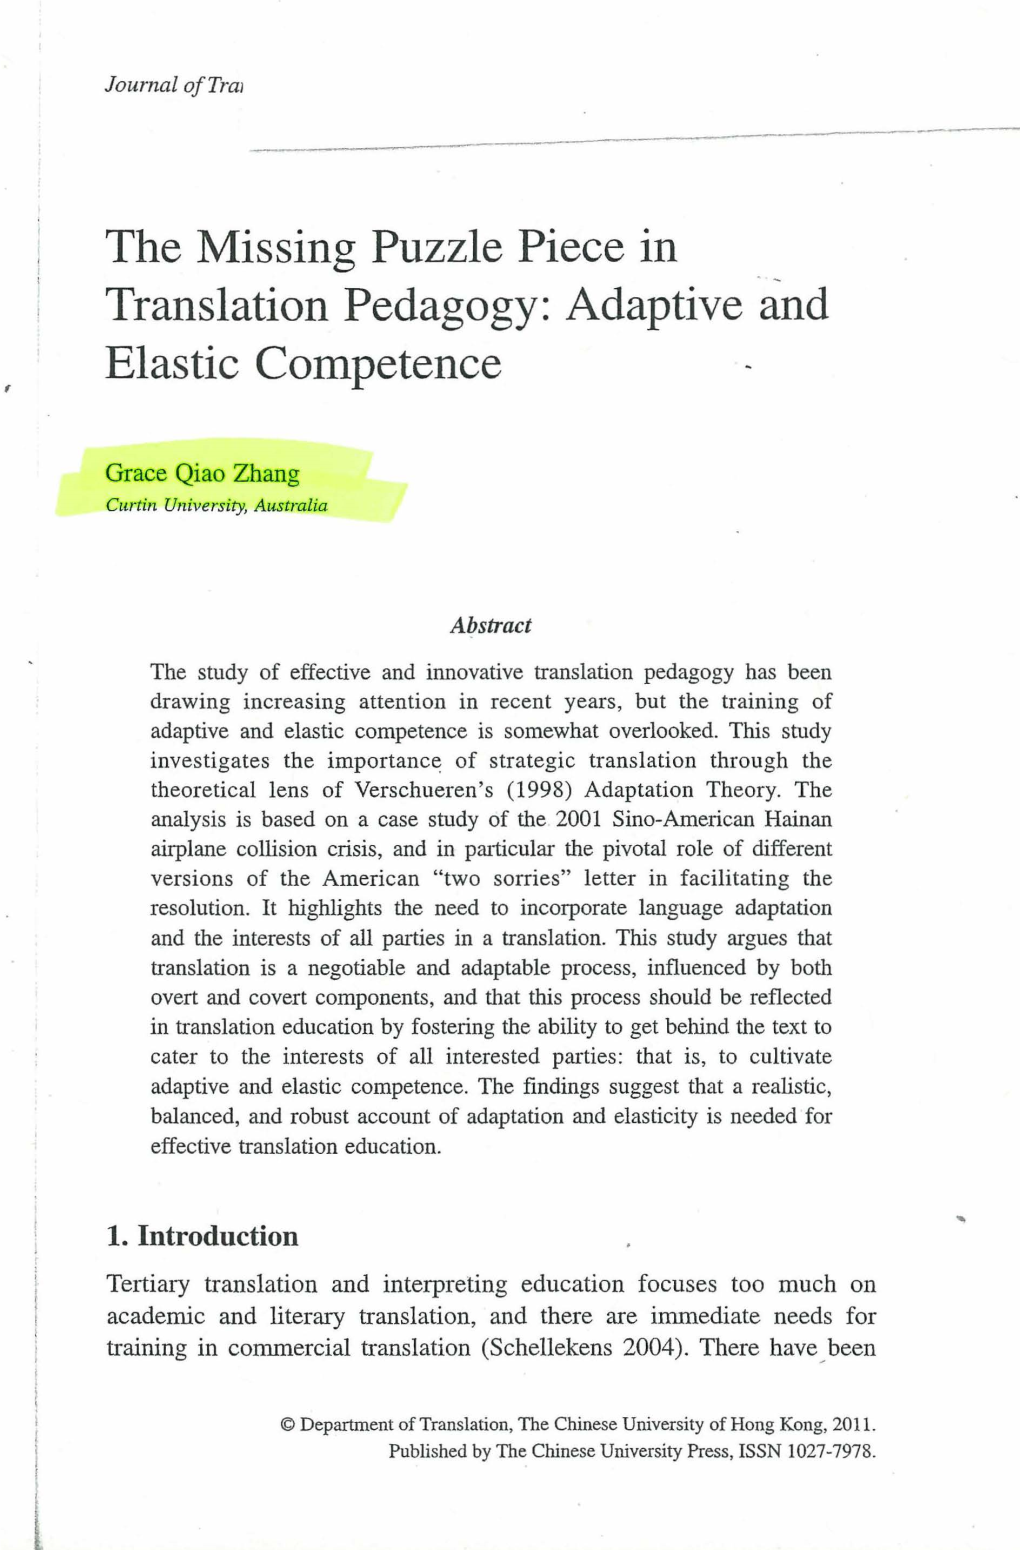 The Missing Puzzle Piece in Translation Pedagogy: Adaptive and Elastic Competence